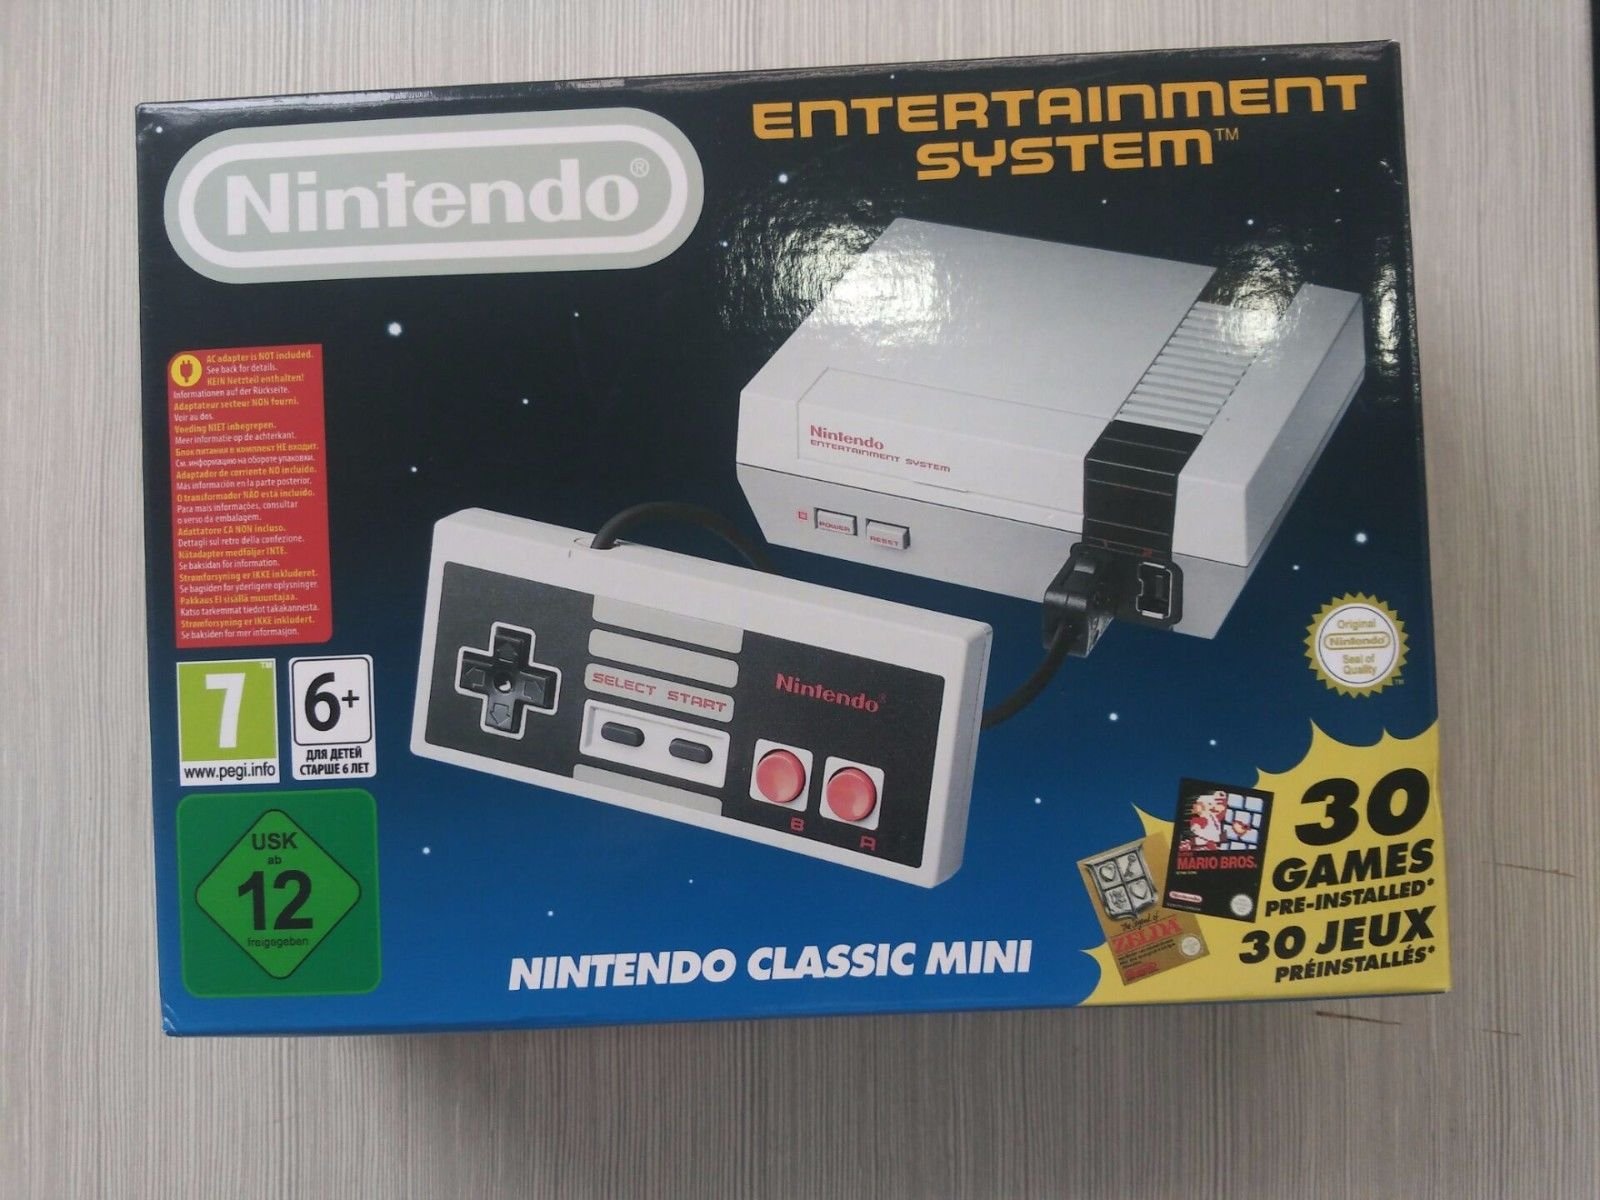 Alleged Nintendo Nes Classic Knock-Off Spotted In The Wild